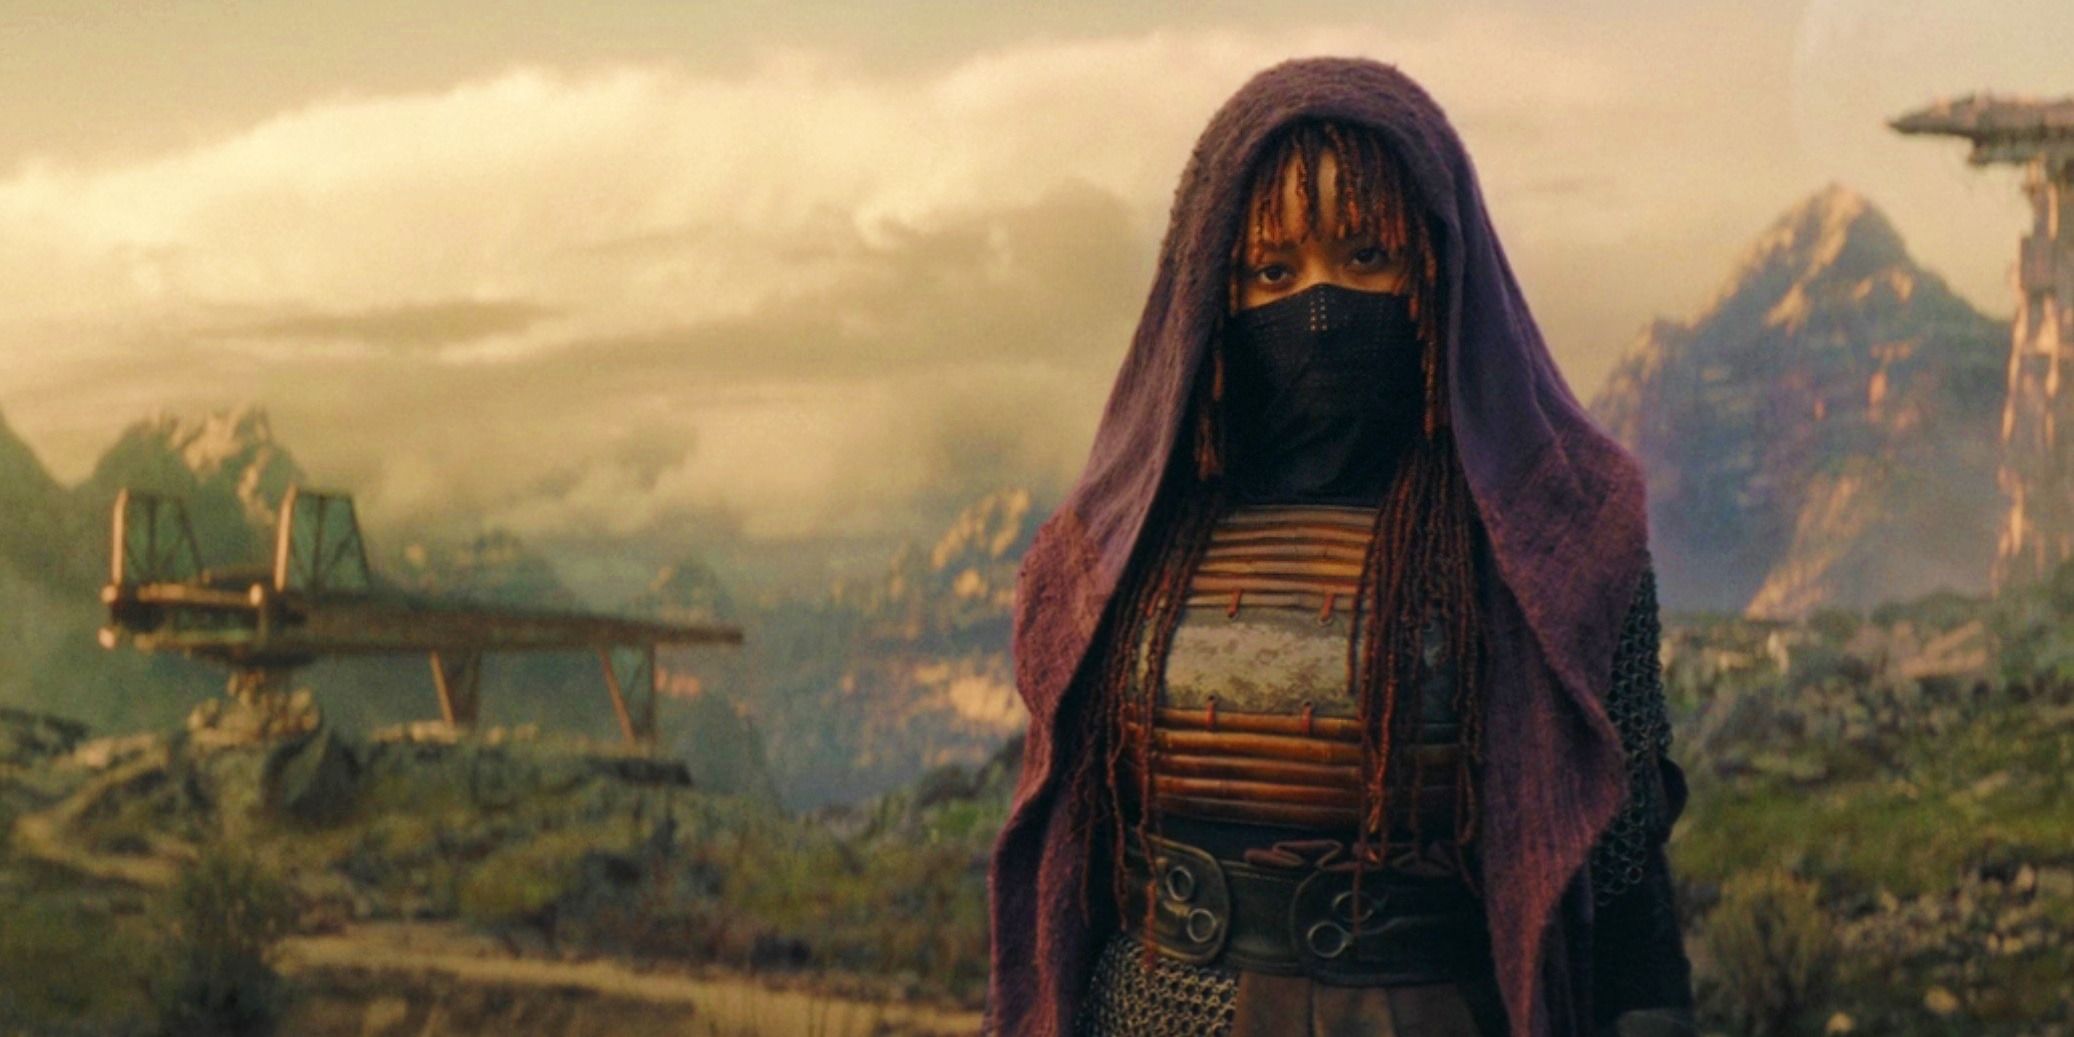 Mae standing on Ueda in The Acolyte with her mask and hood up and a ship and mountain in the background